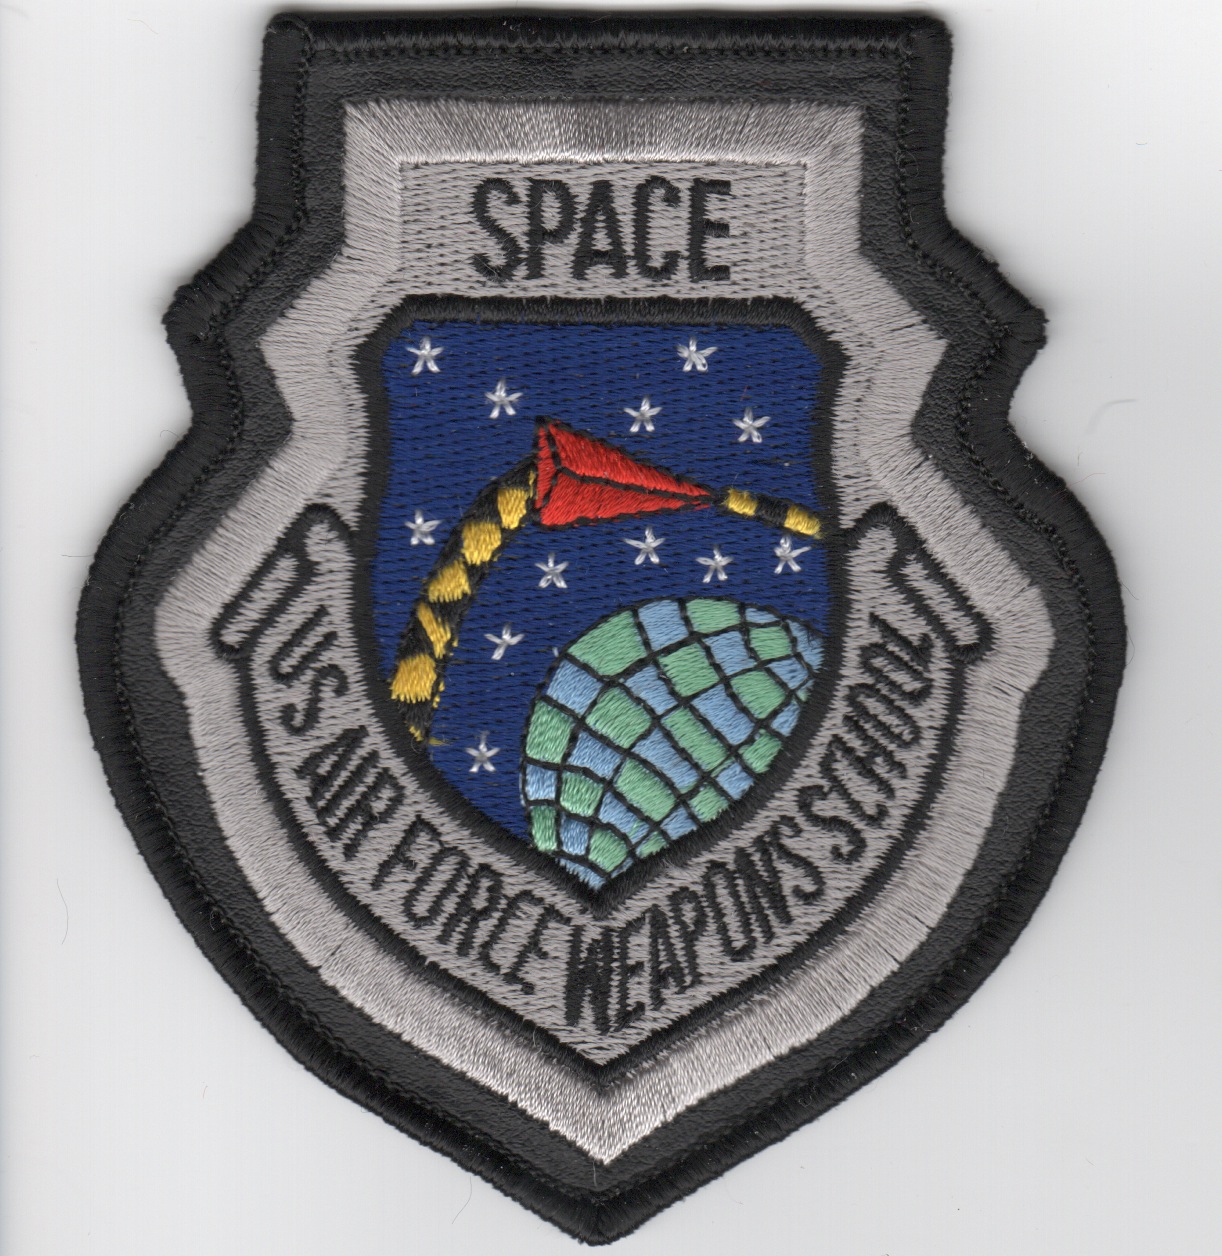 USAF WIC 'SPACE' Division Patch (LX)